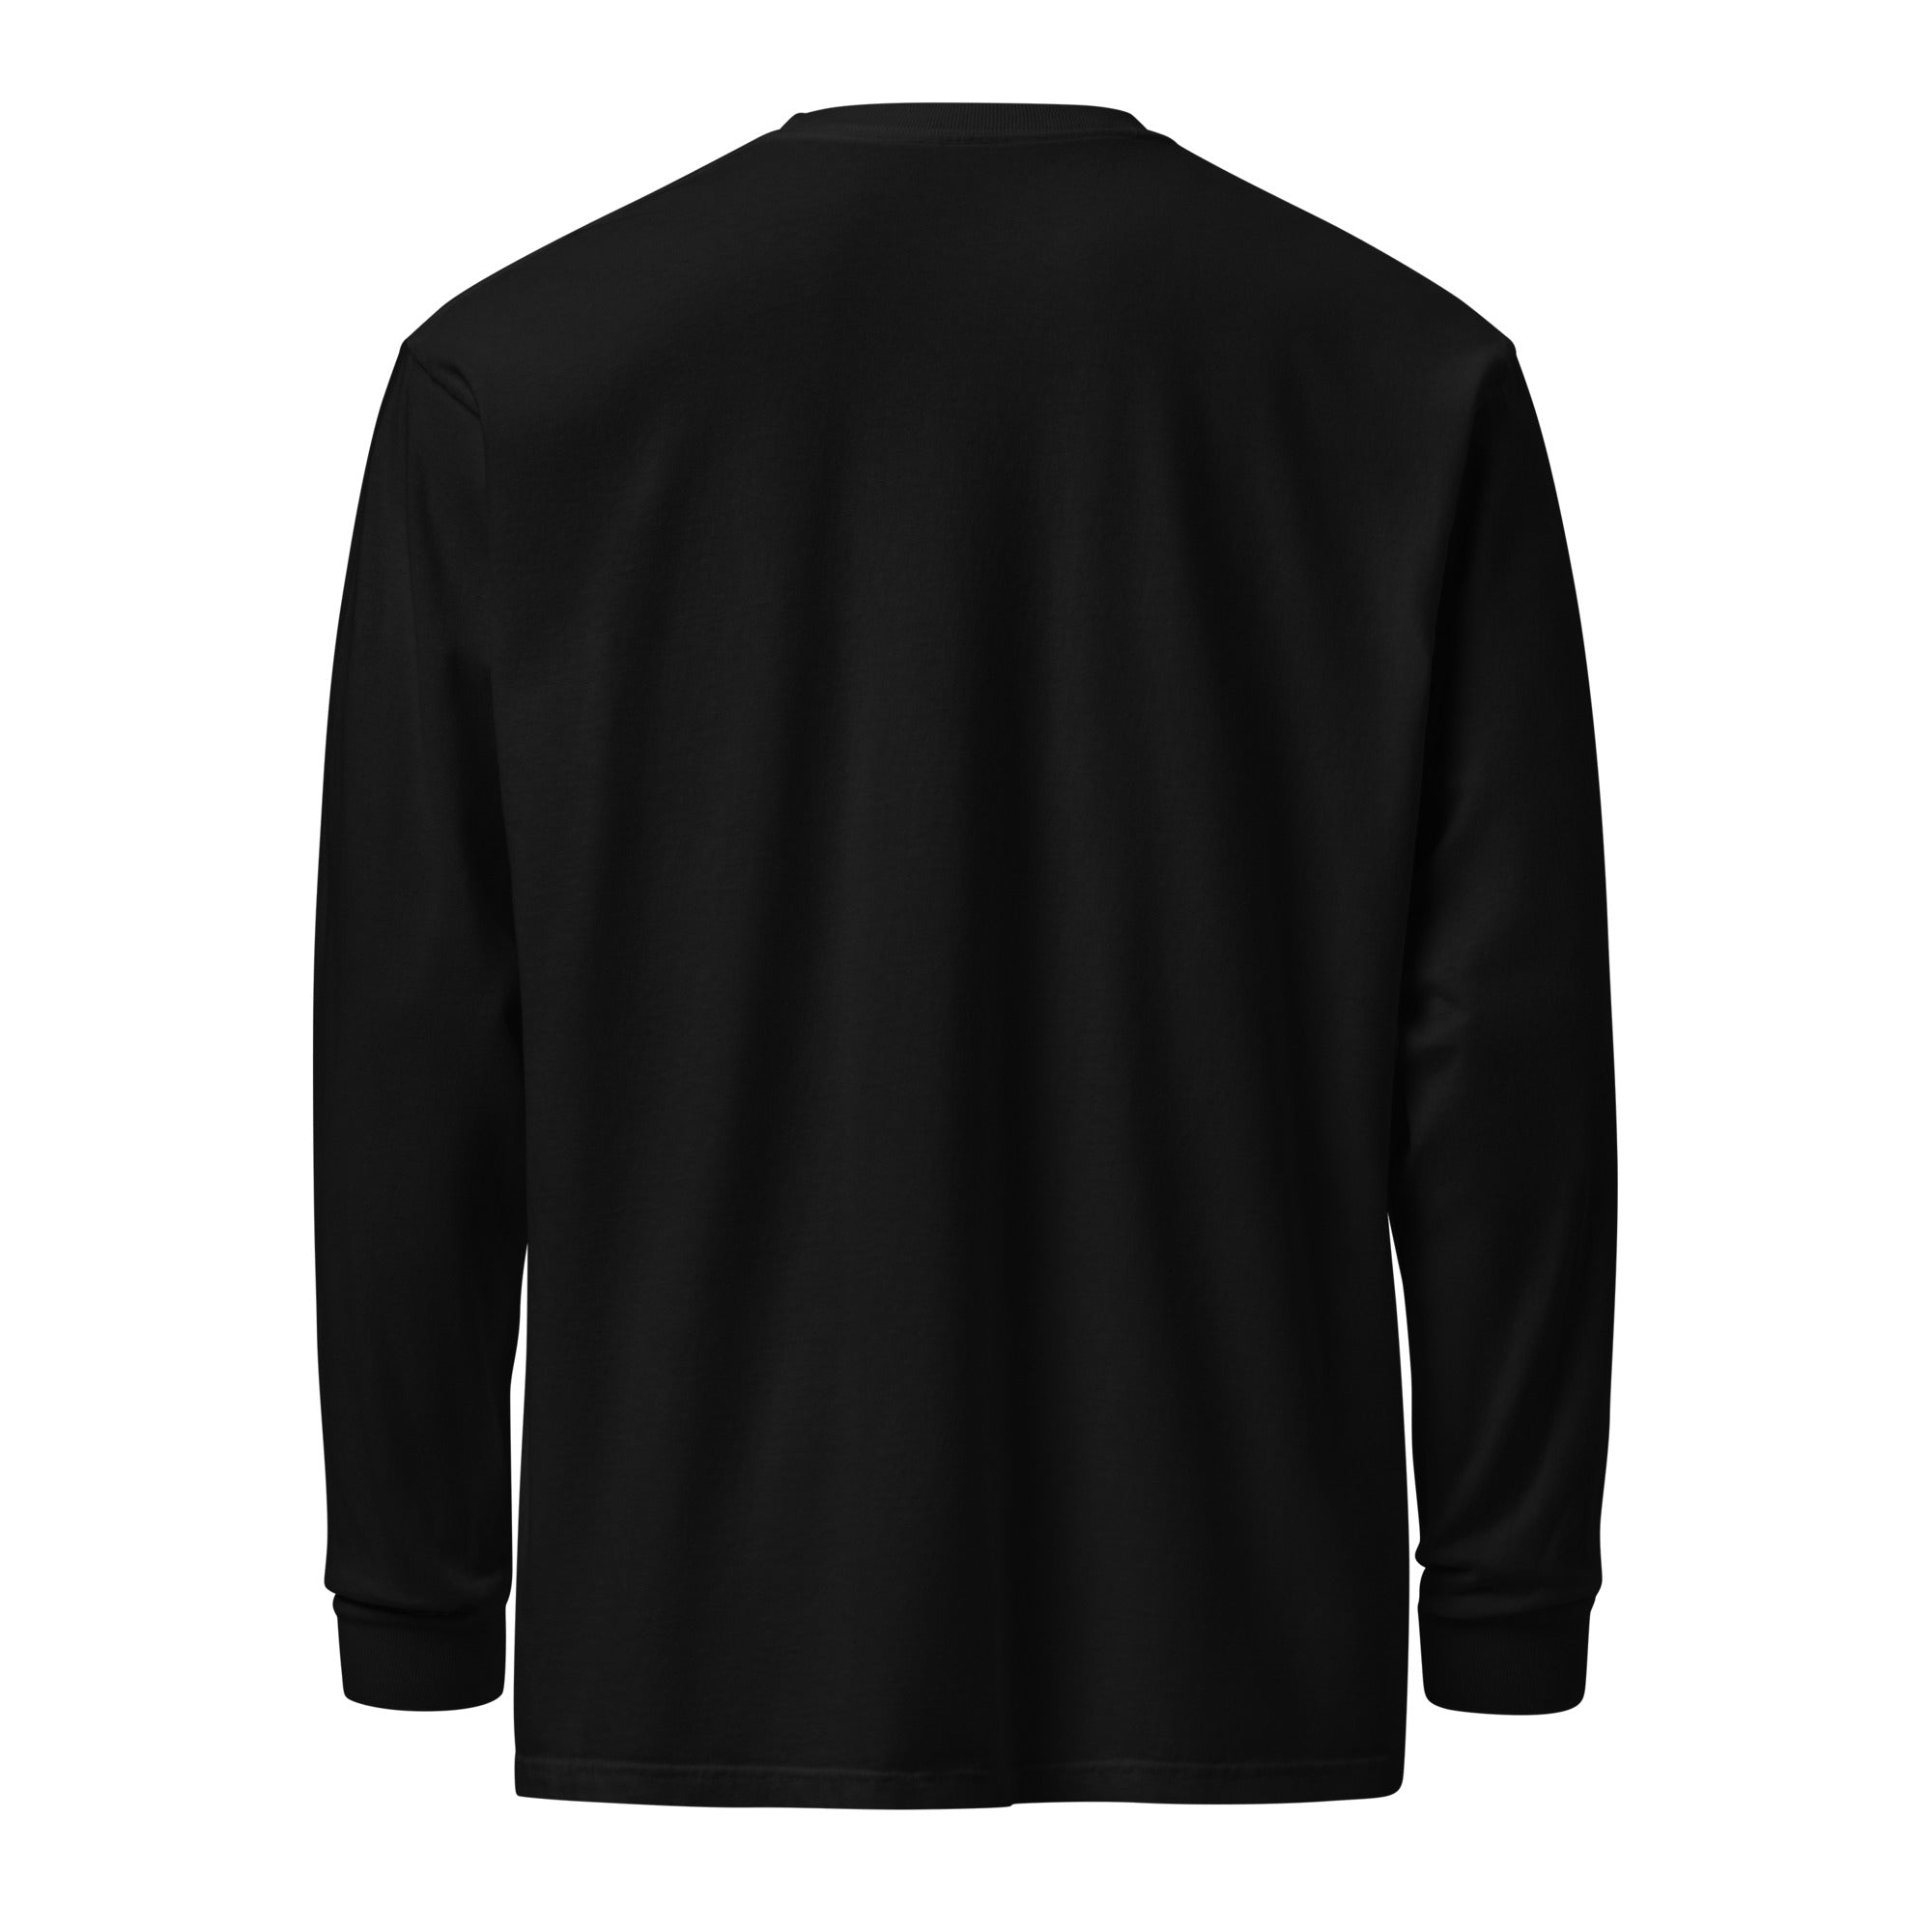 Come In Peace Or Leave In Pieces Garment-dyed heavyweight Long-sleeve Shirt